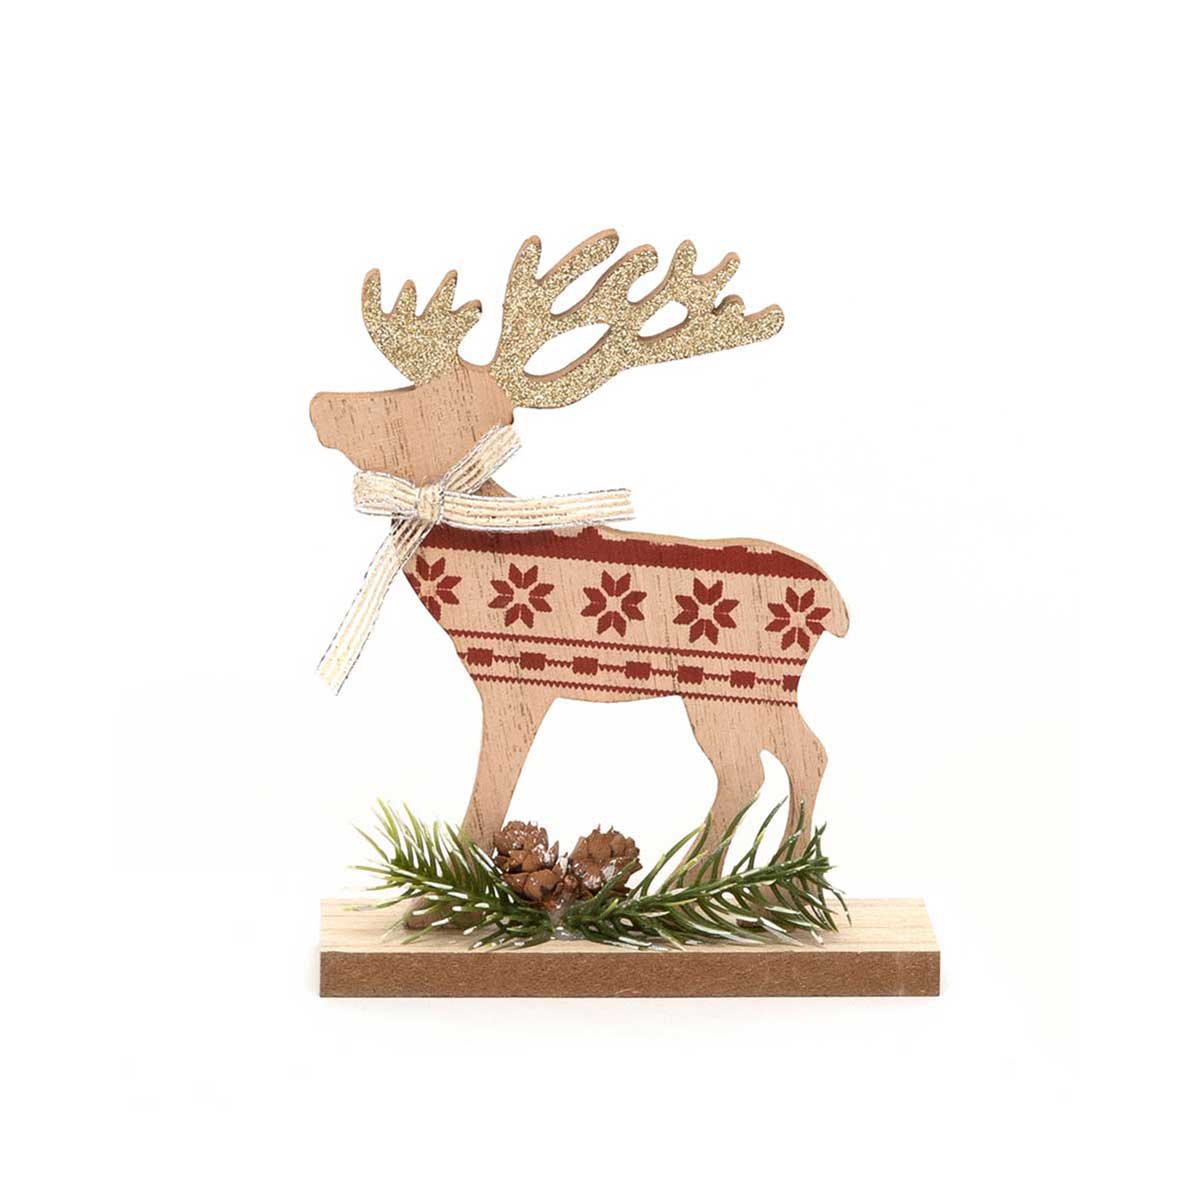 SWEDISH REINDEER SIT-A-BOUT SMALL